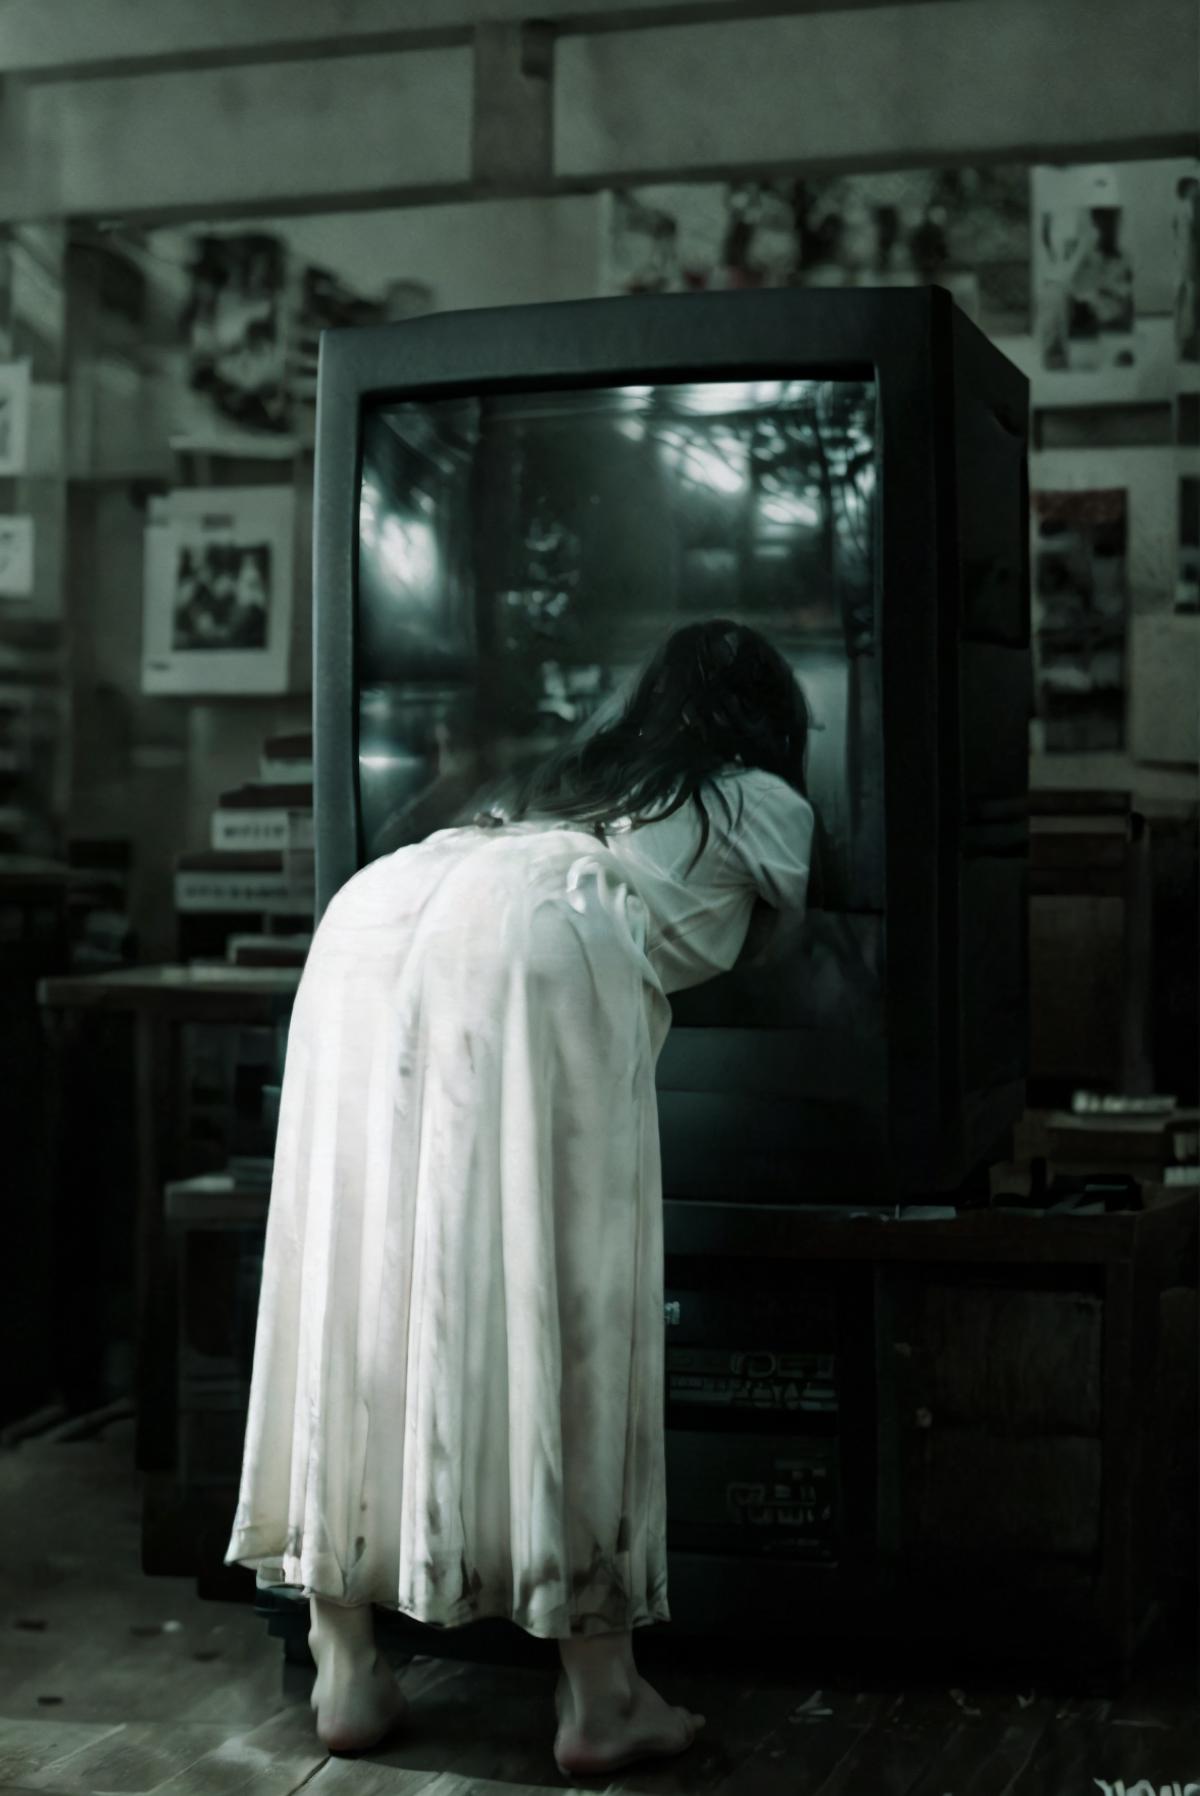 Woman in white dress leaning against TV screen.